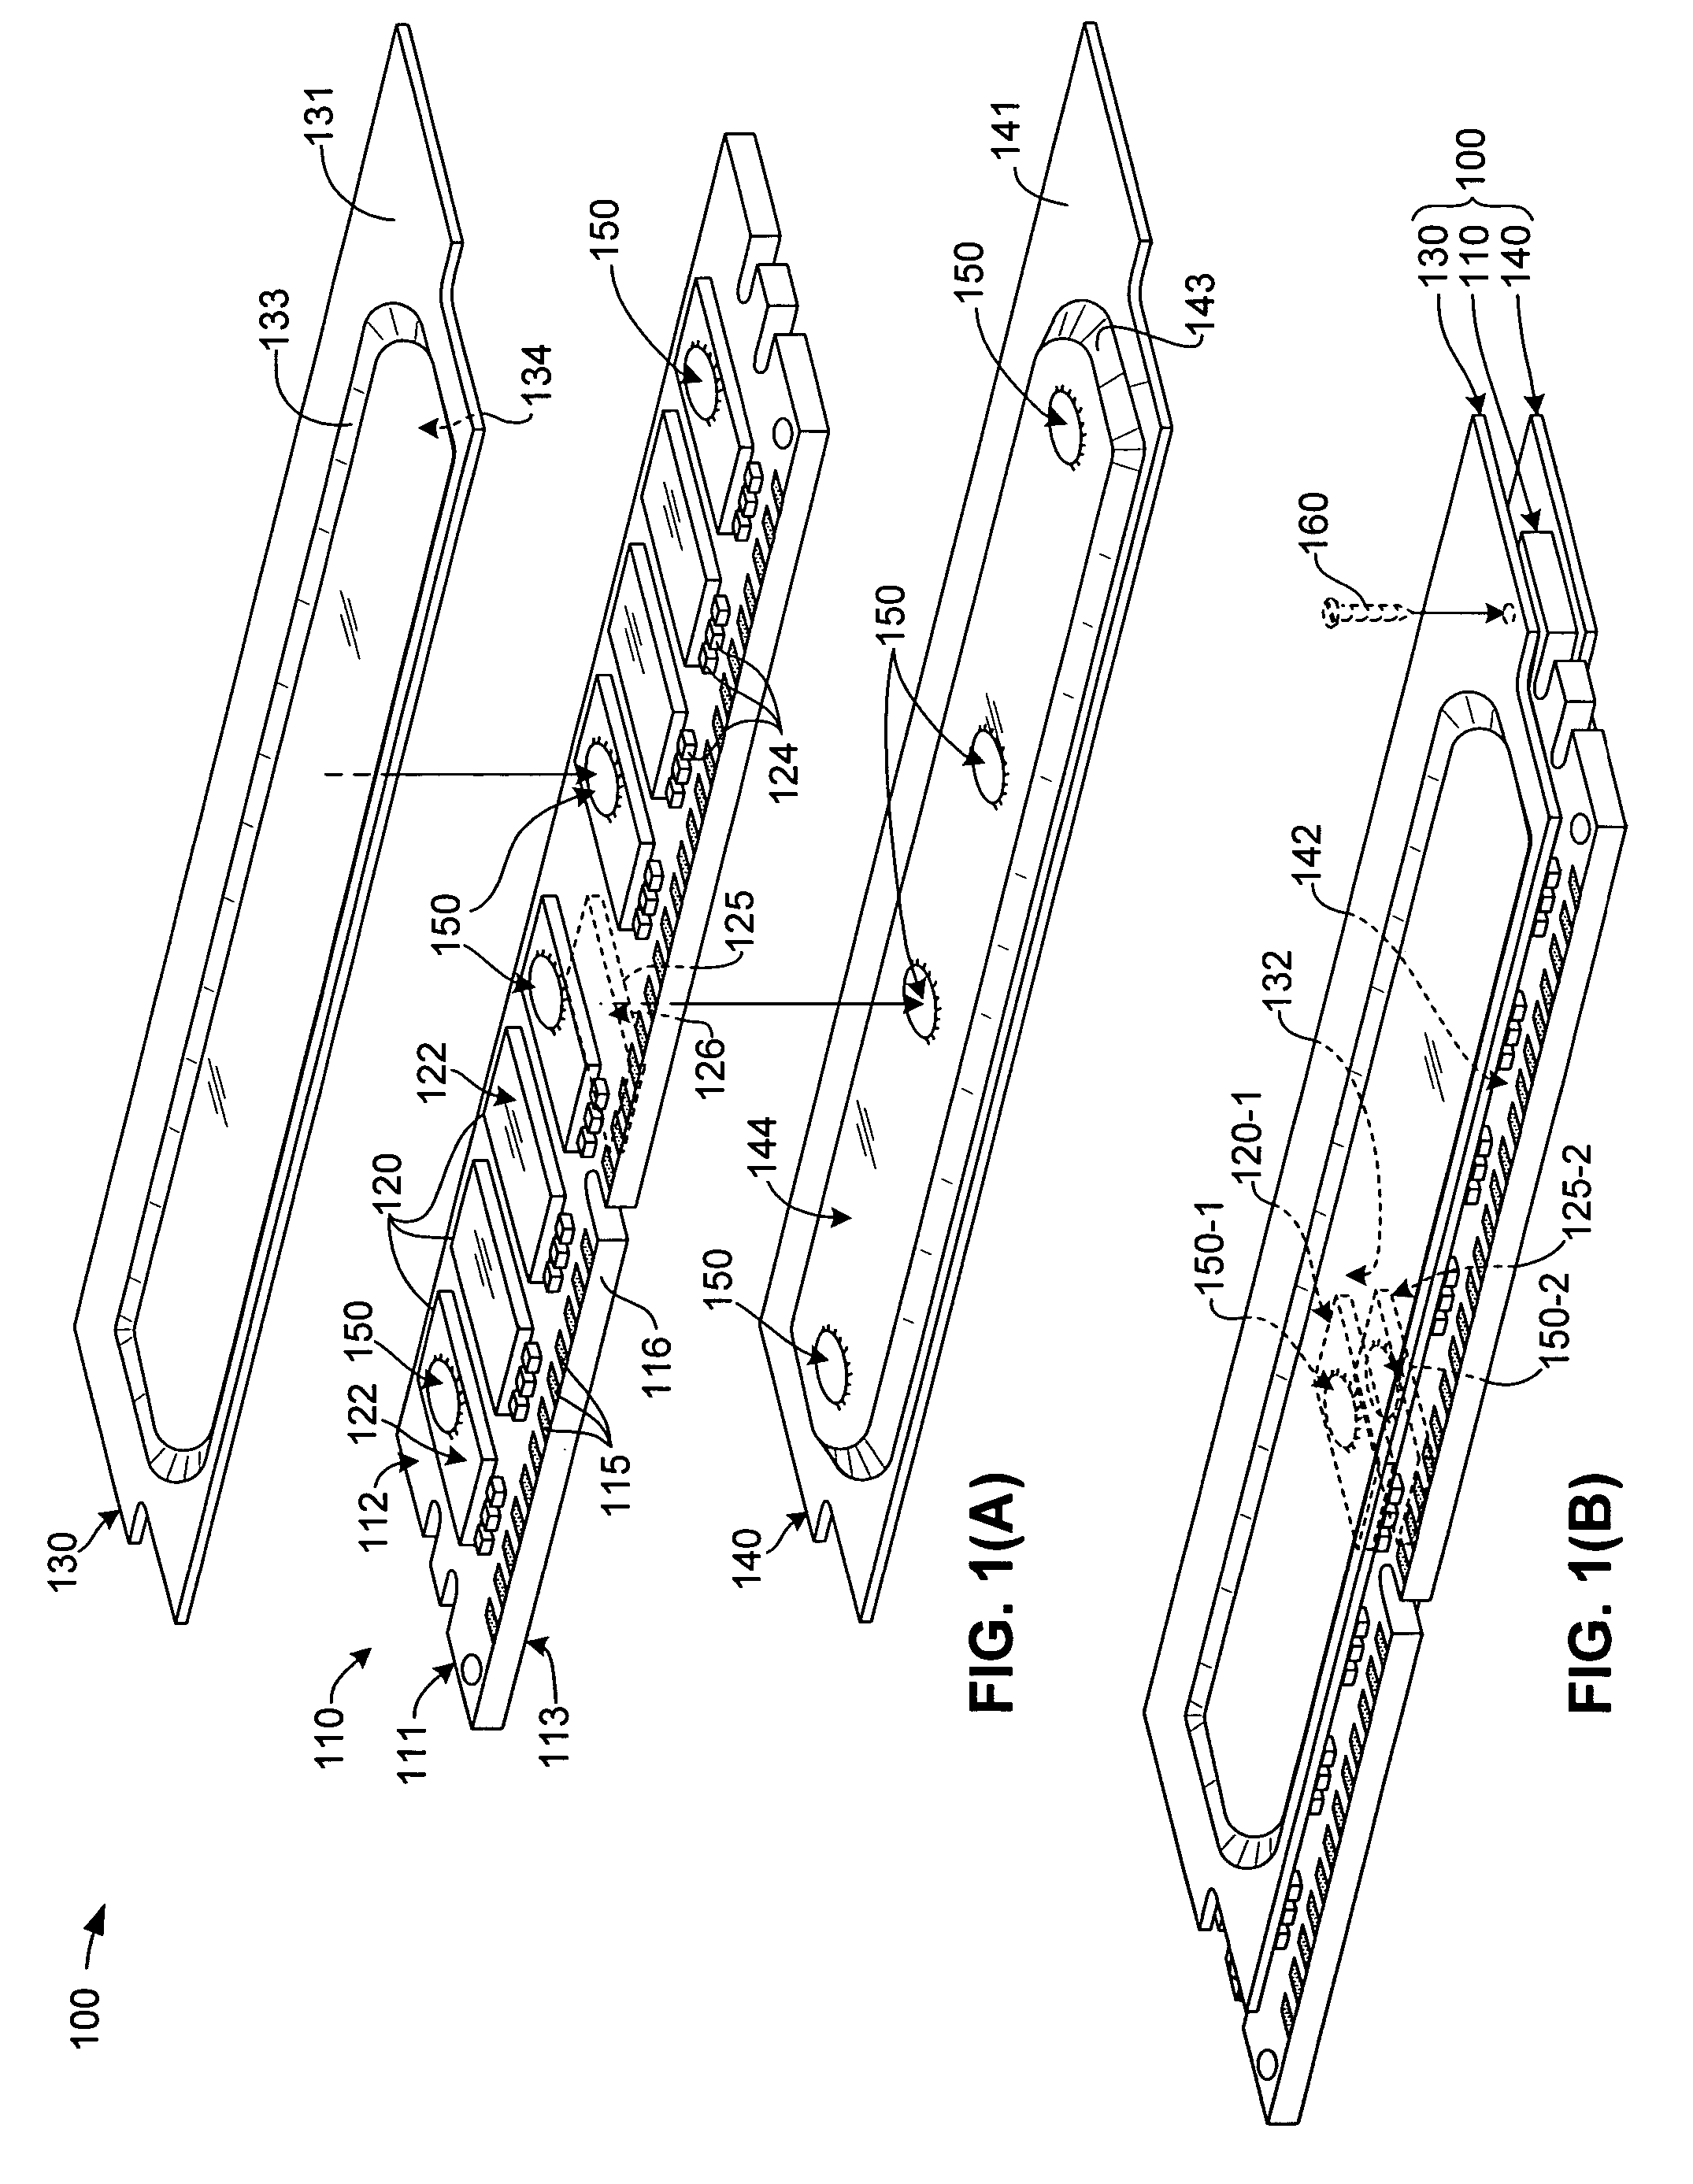 Memory module assembly including heat sink attached to integrated circuits by adhesive